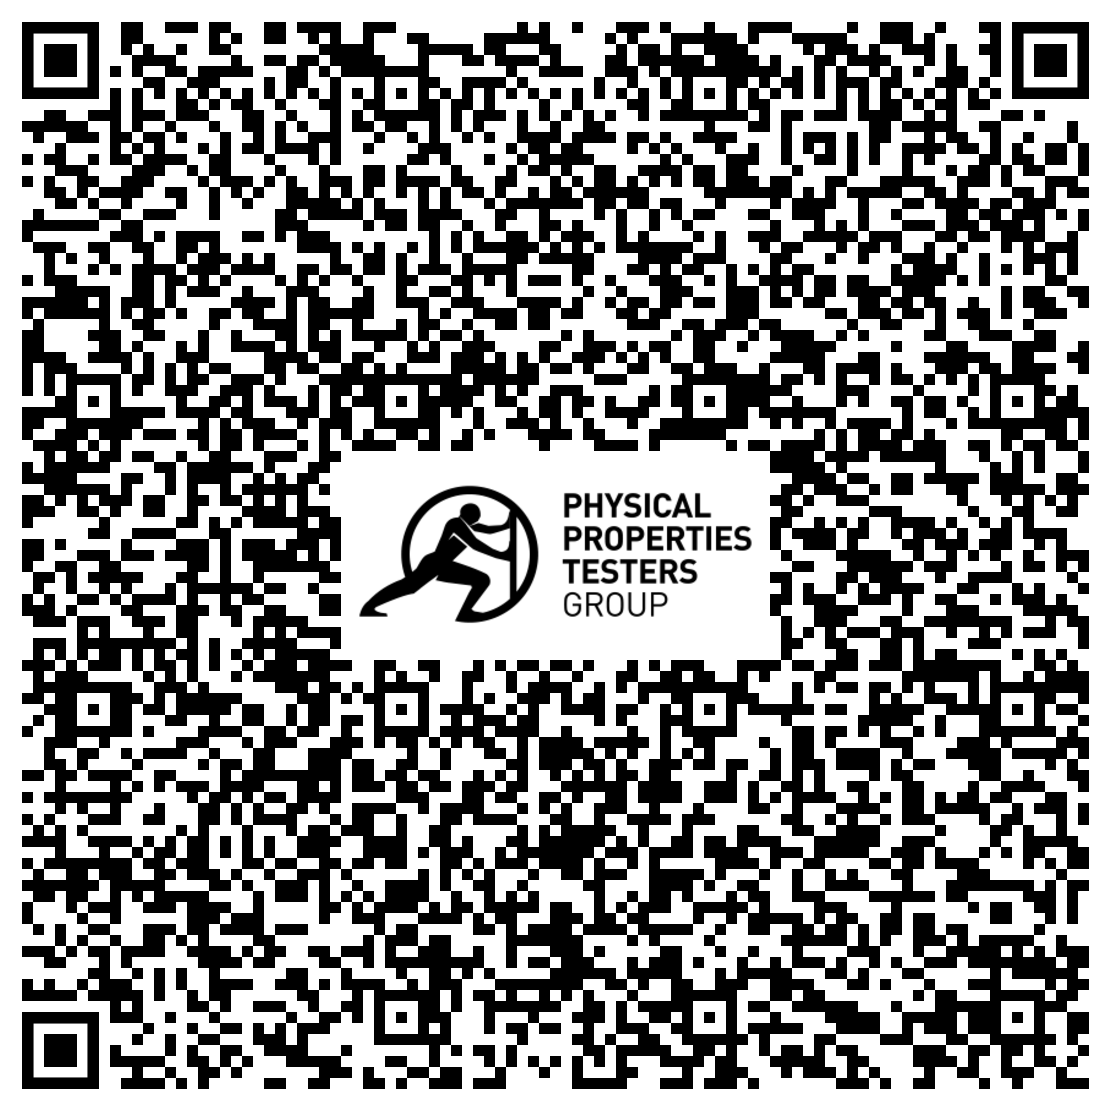 Scan QR code to add contact details to your phone